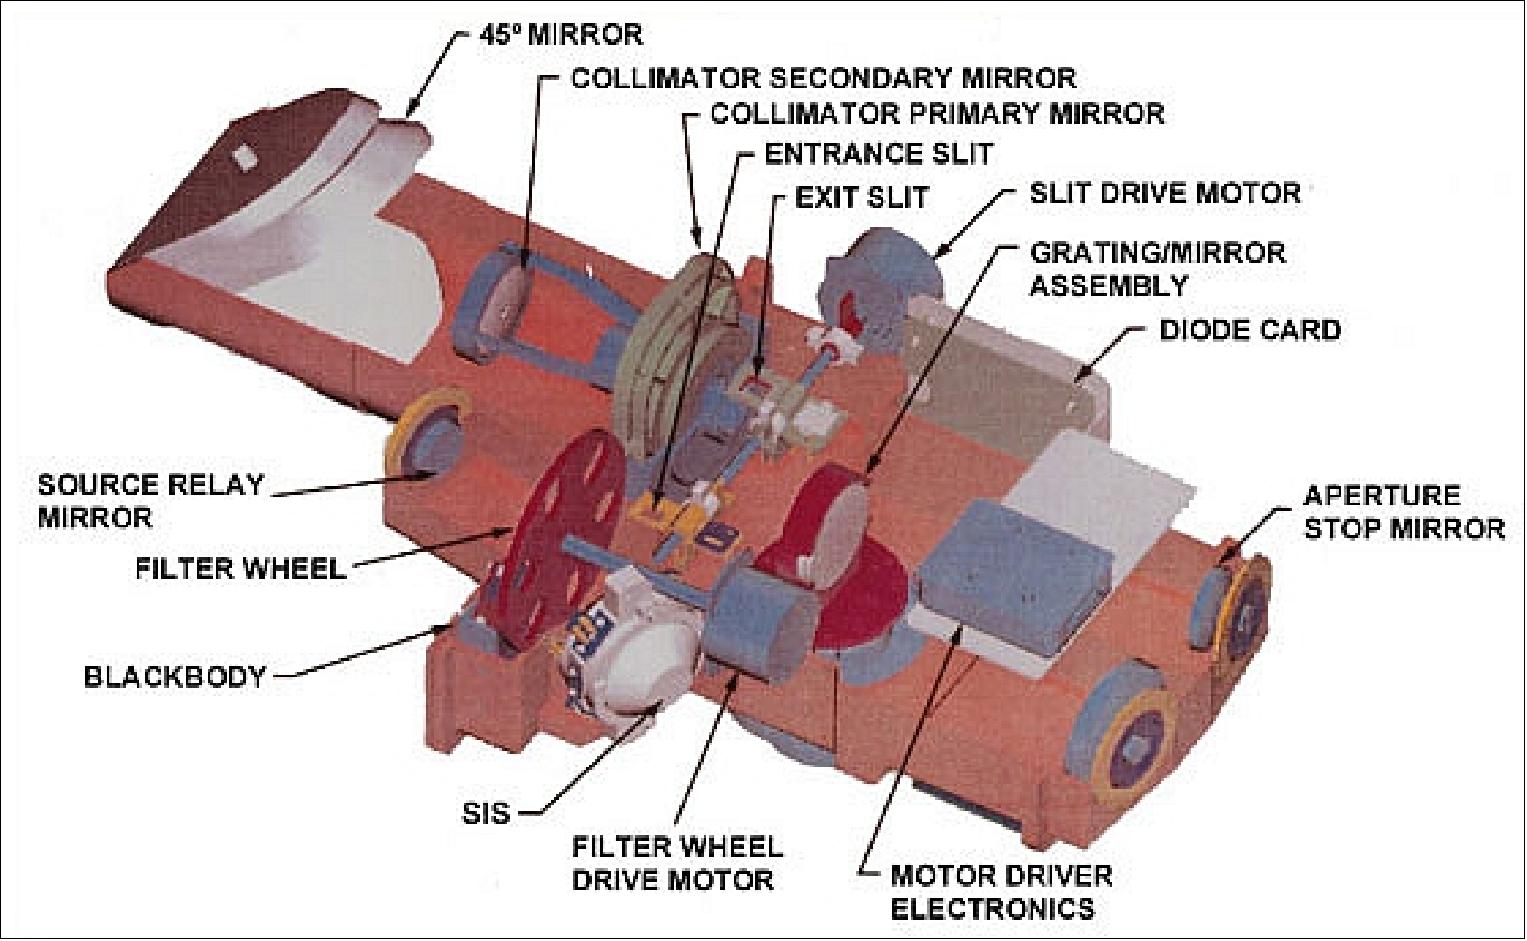 Figure 52: Schematic view of the SRCA device (image credit: NASA/GSFC)